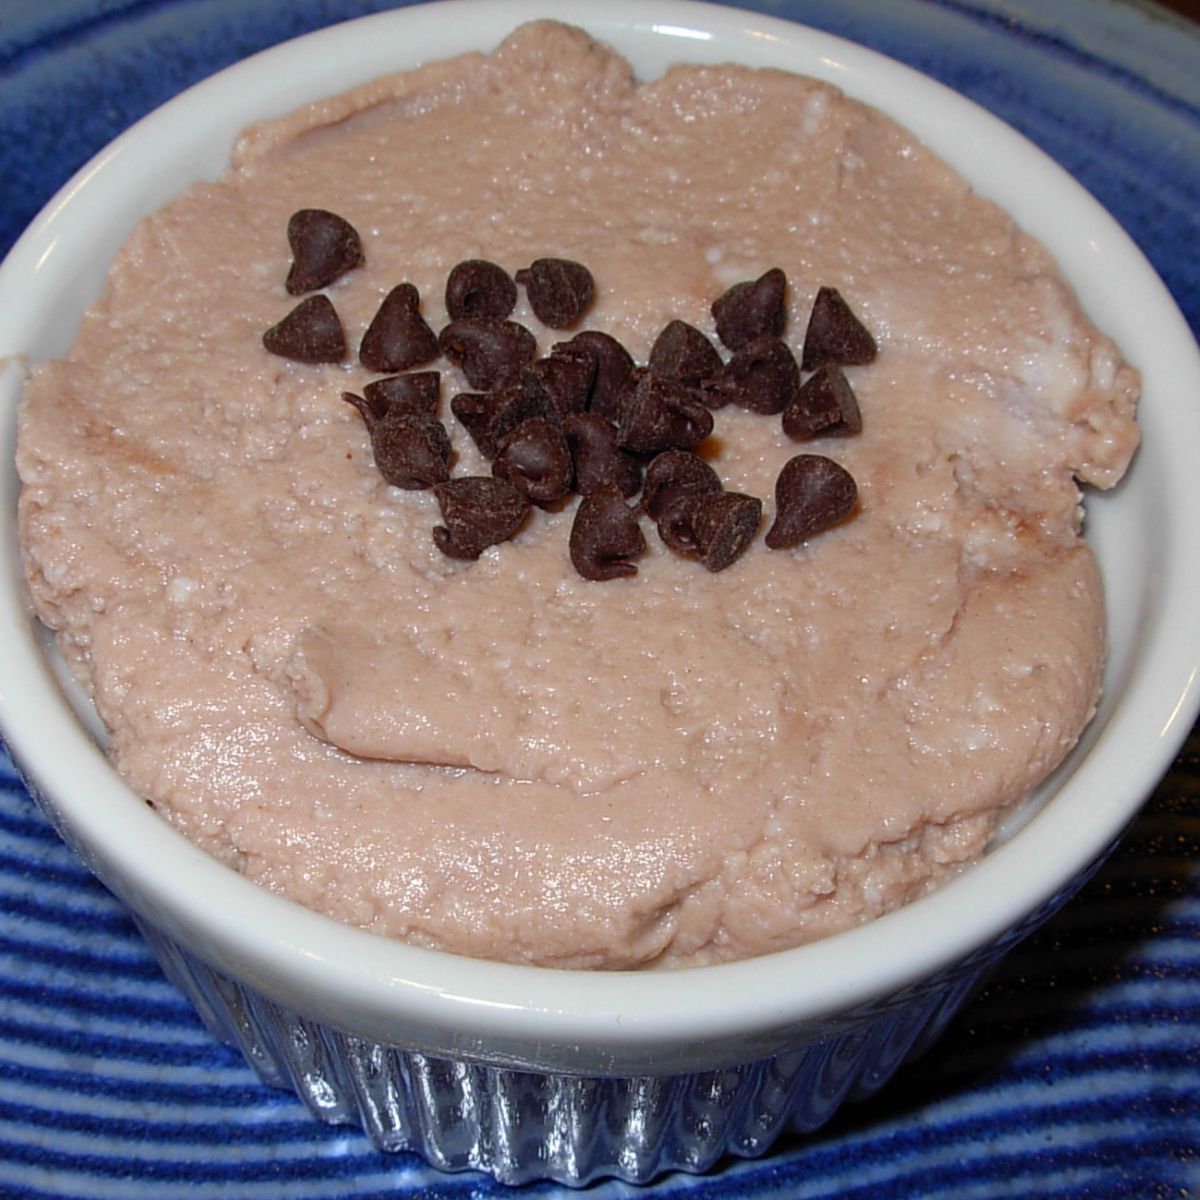 mocha ricotta creme with chocolate chips on top.